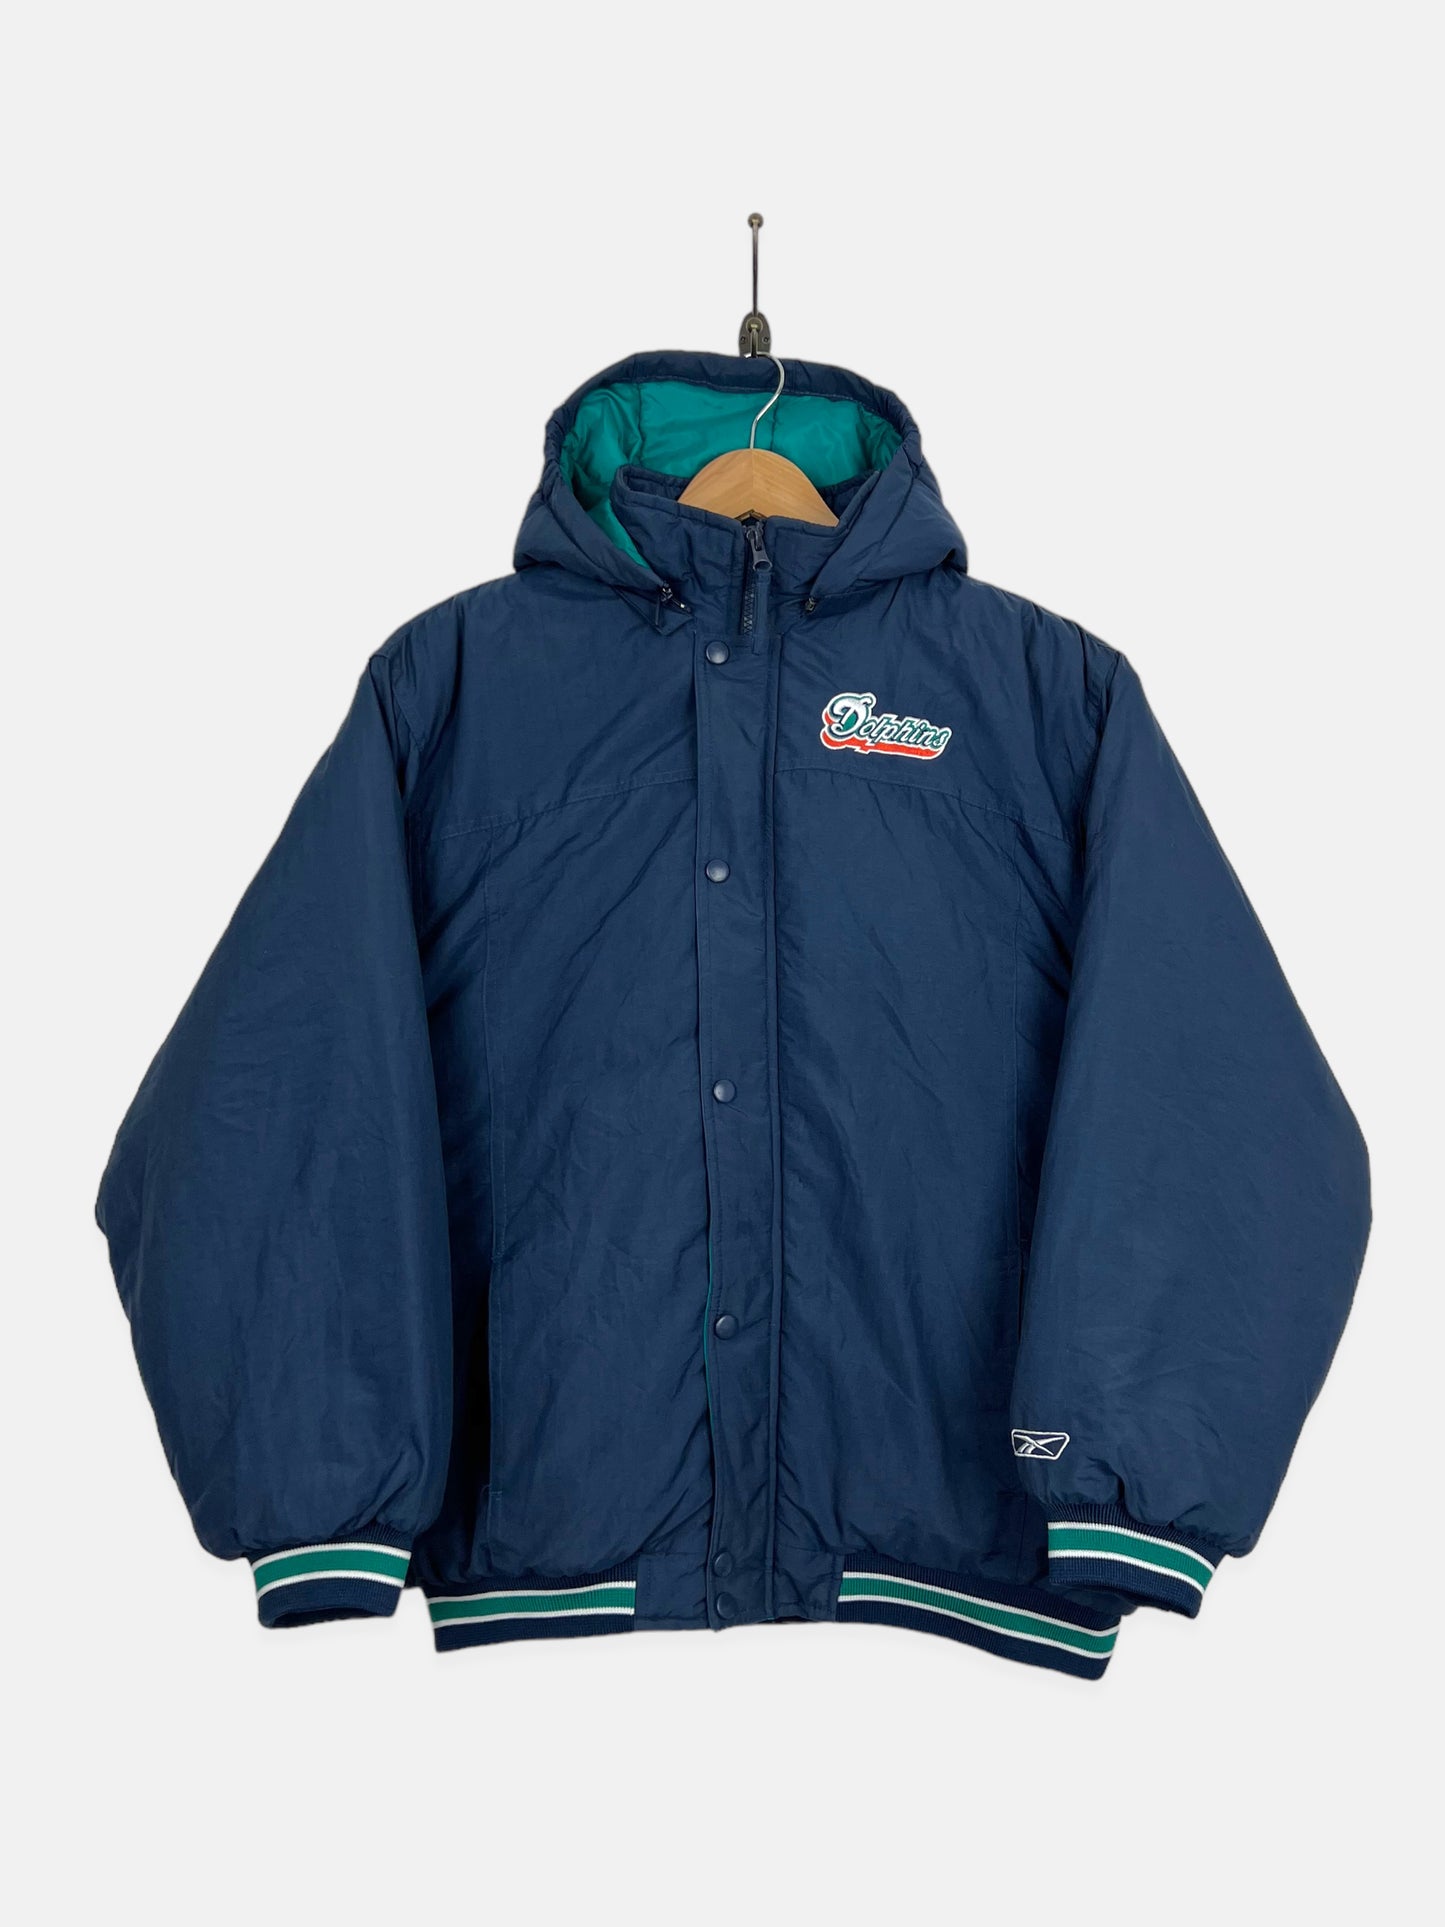 90's Miami Dolphins Reeebok NFL Embroidered Puffer Jacket Size M